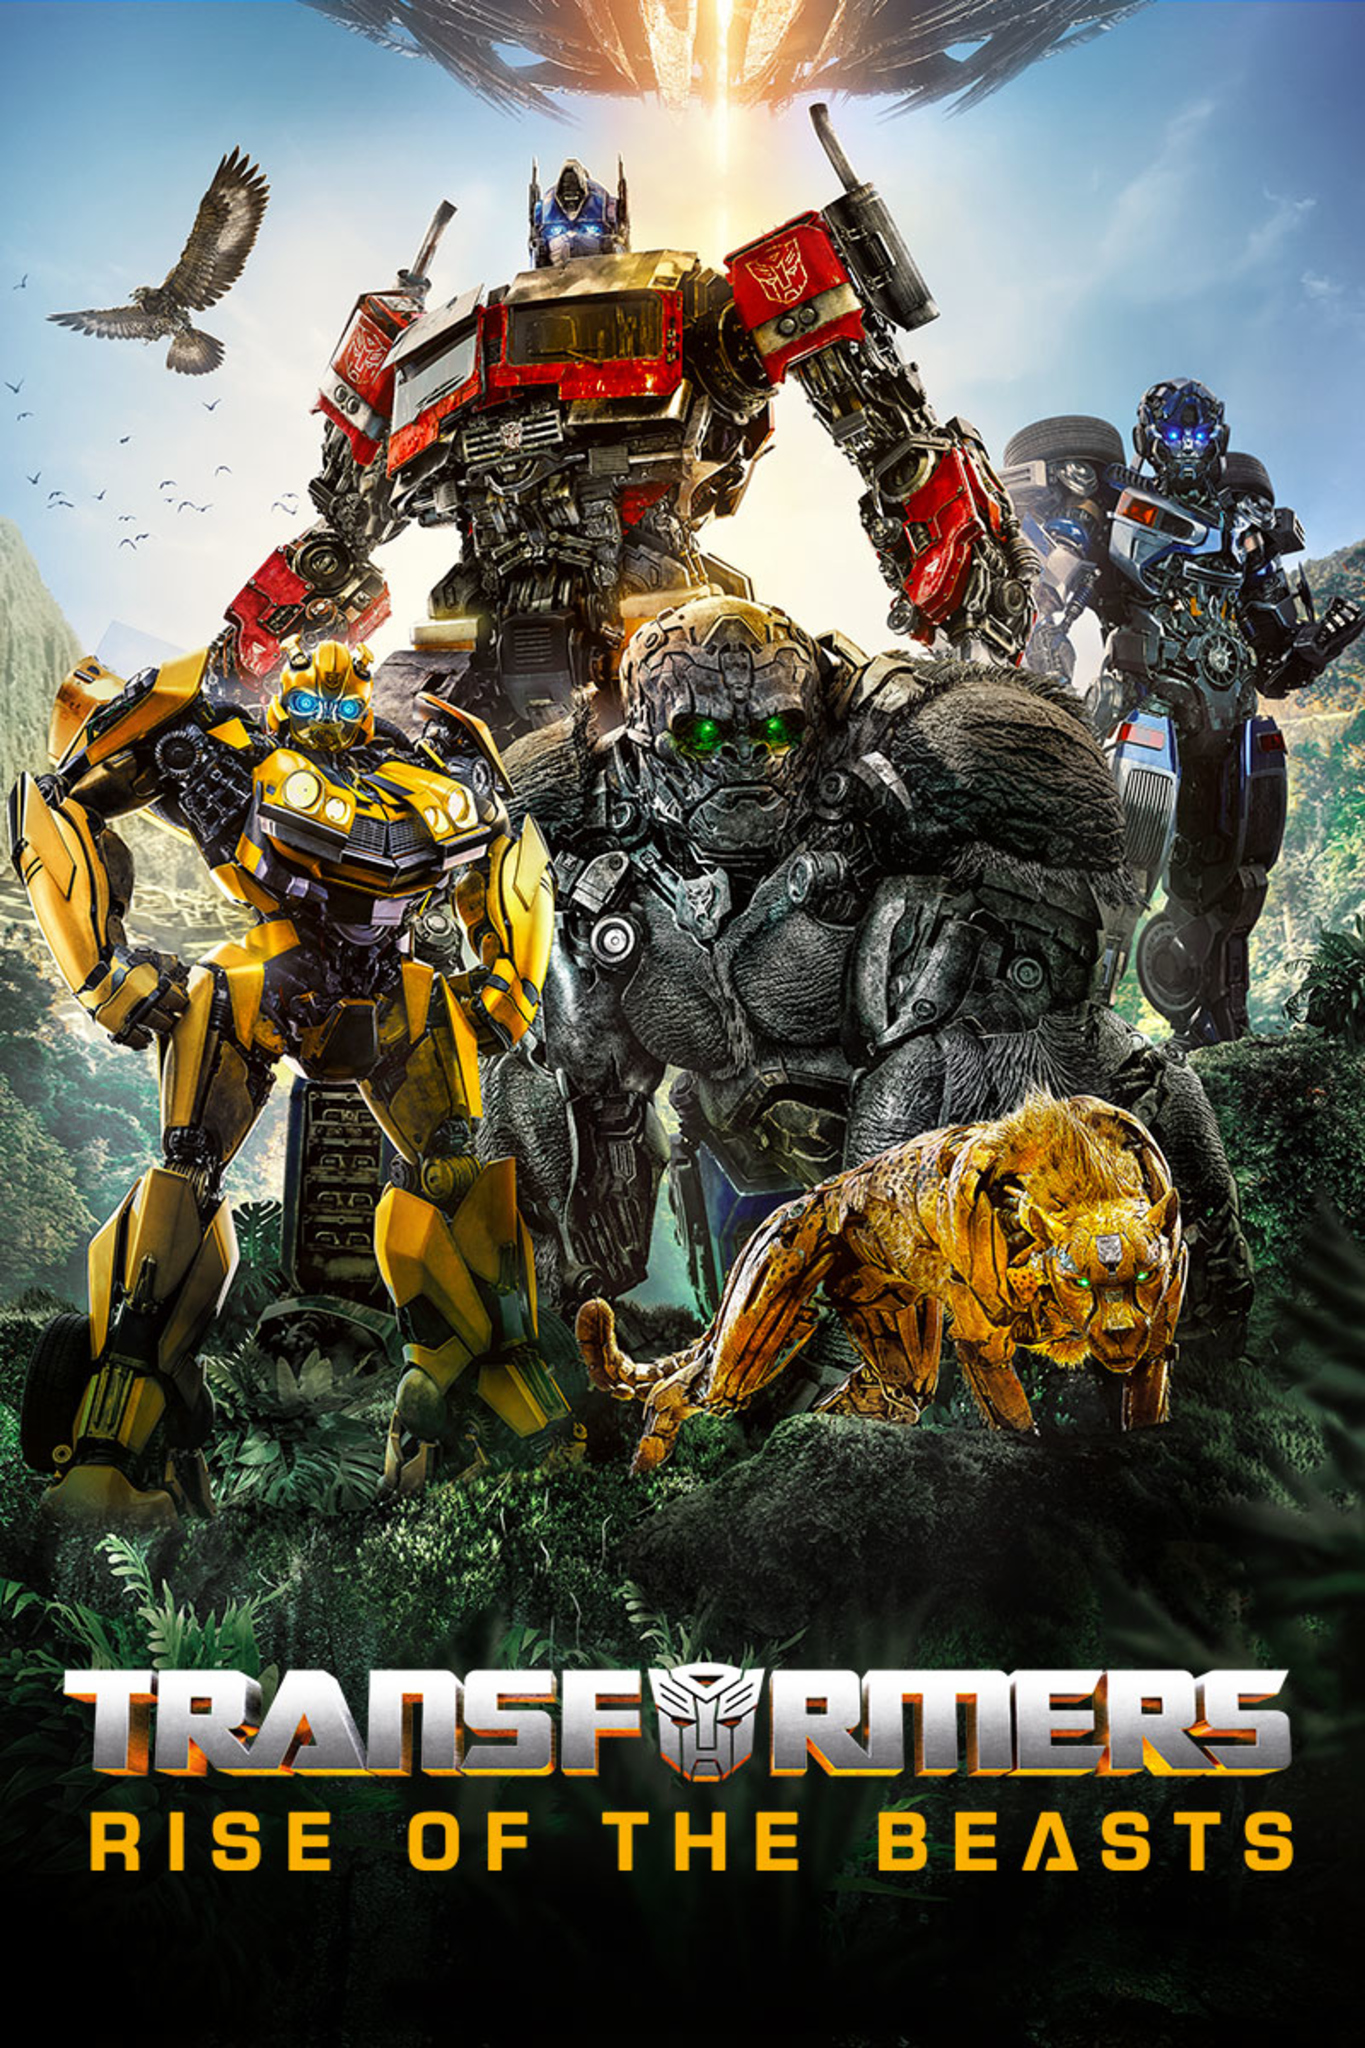 transformers: rise of the beasts coming to dvd 10.10